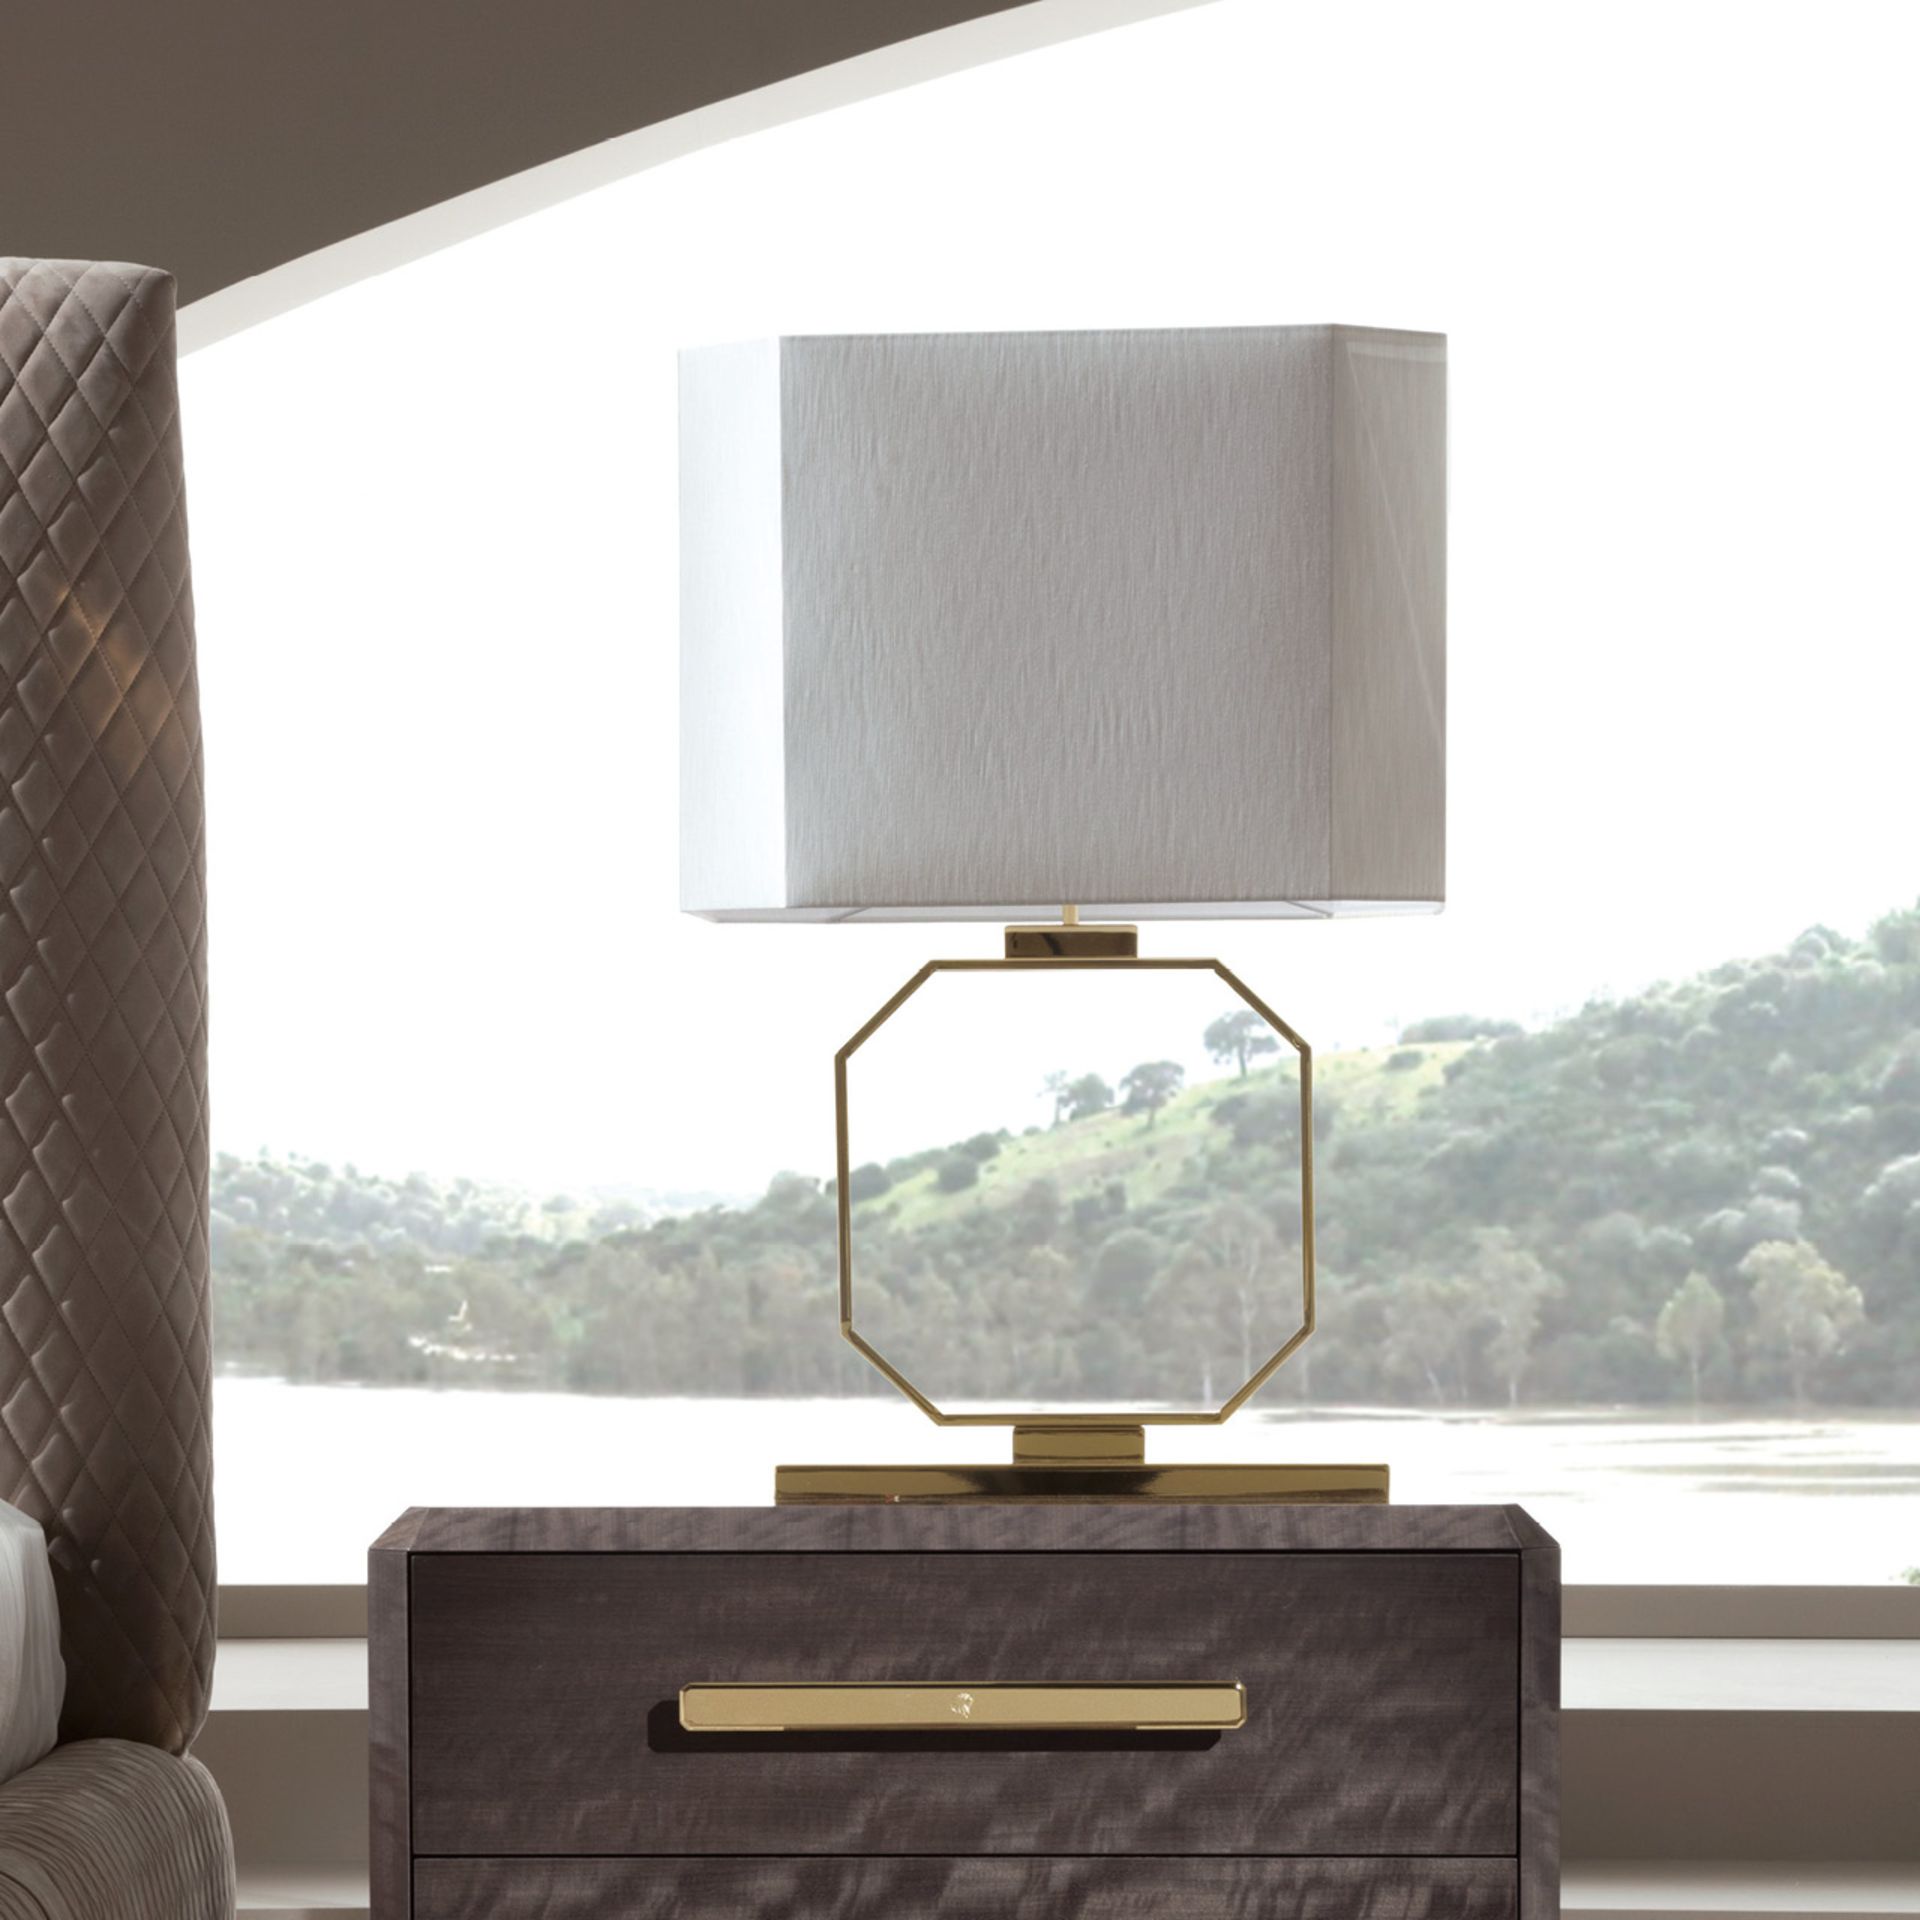 1 x GIORGIO COLLECTION 'Infinity' Luxury Table Lamp with Silk Shade - Made In Italy - RRP £4,000 - Image 7 of 7